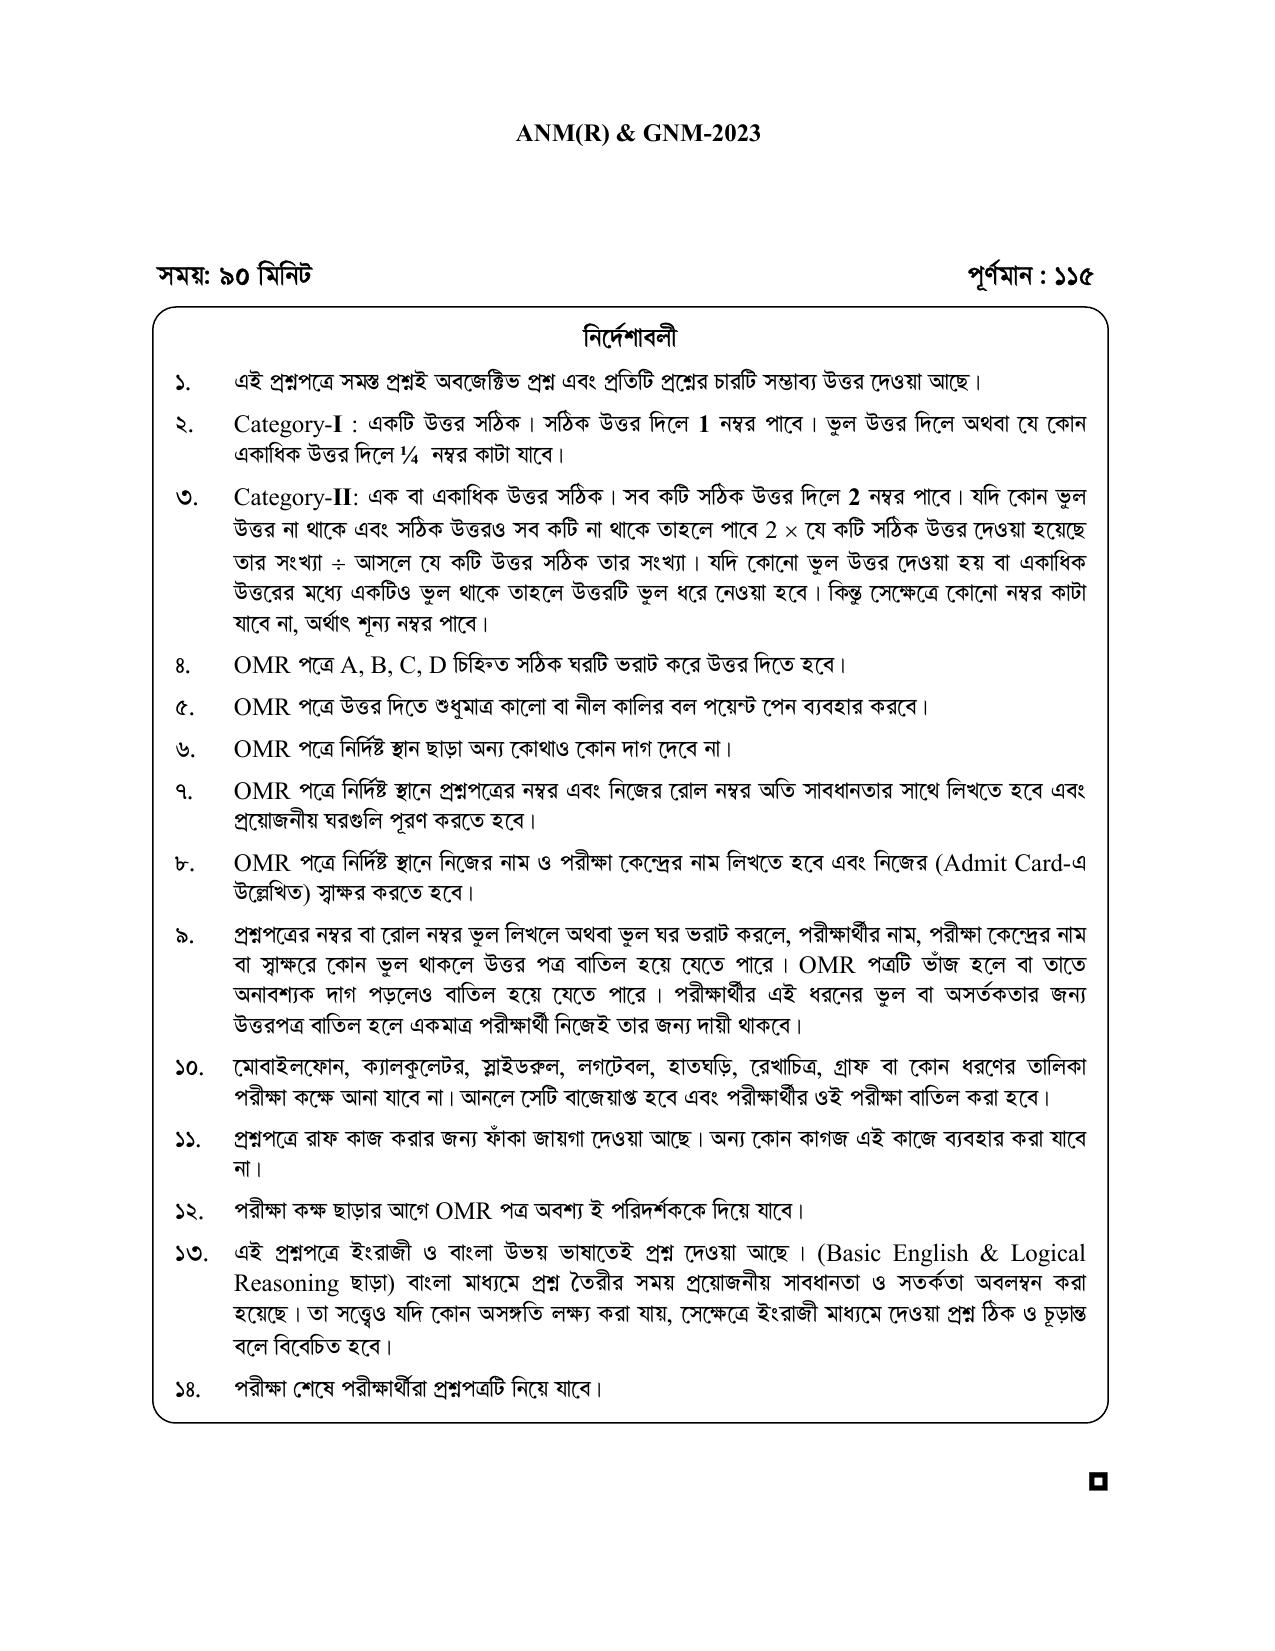 WB ANM GNM 2023 Question Paper - Page 24